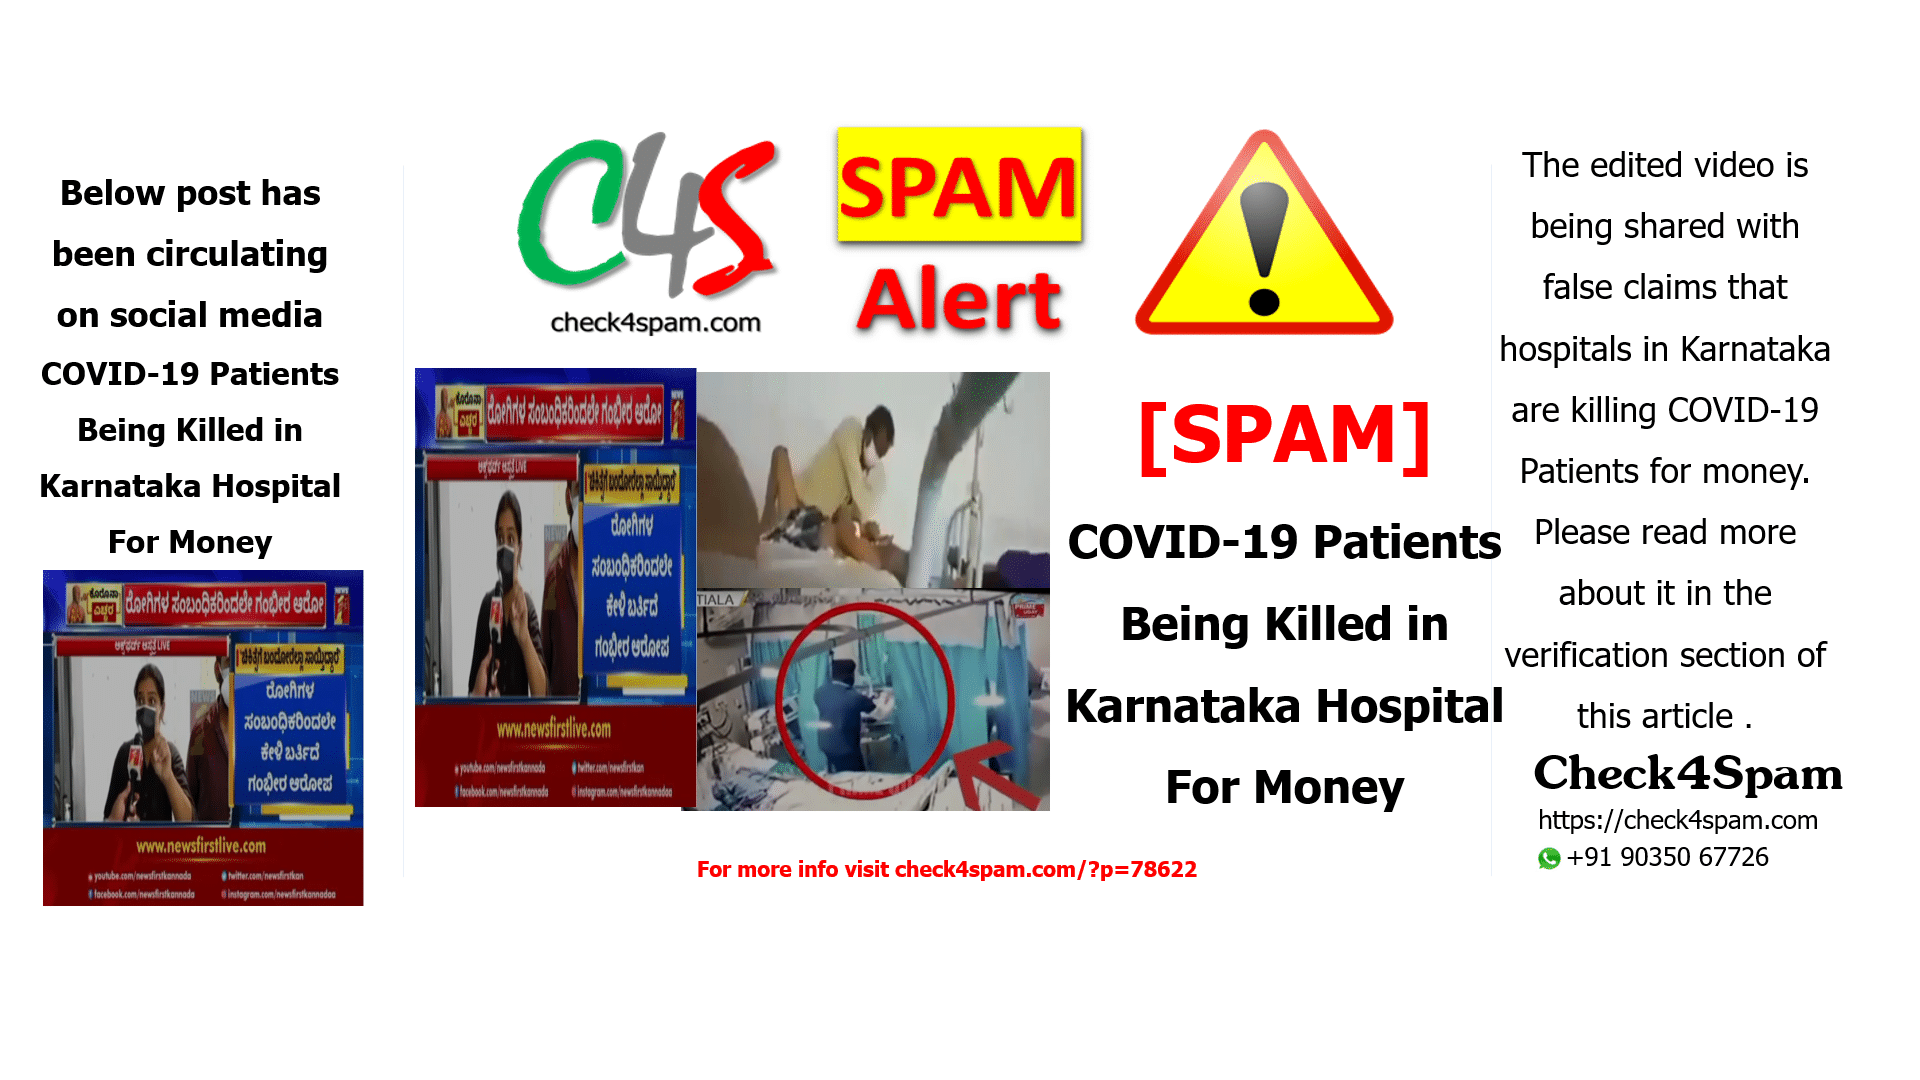 COVID-19 Patients Being Killed in Karnataka Hospital For Money